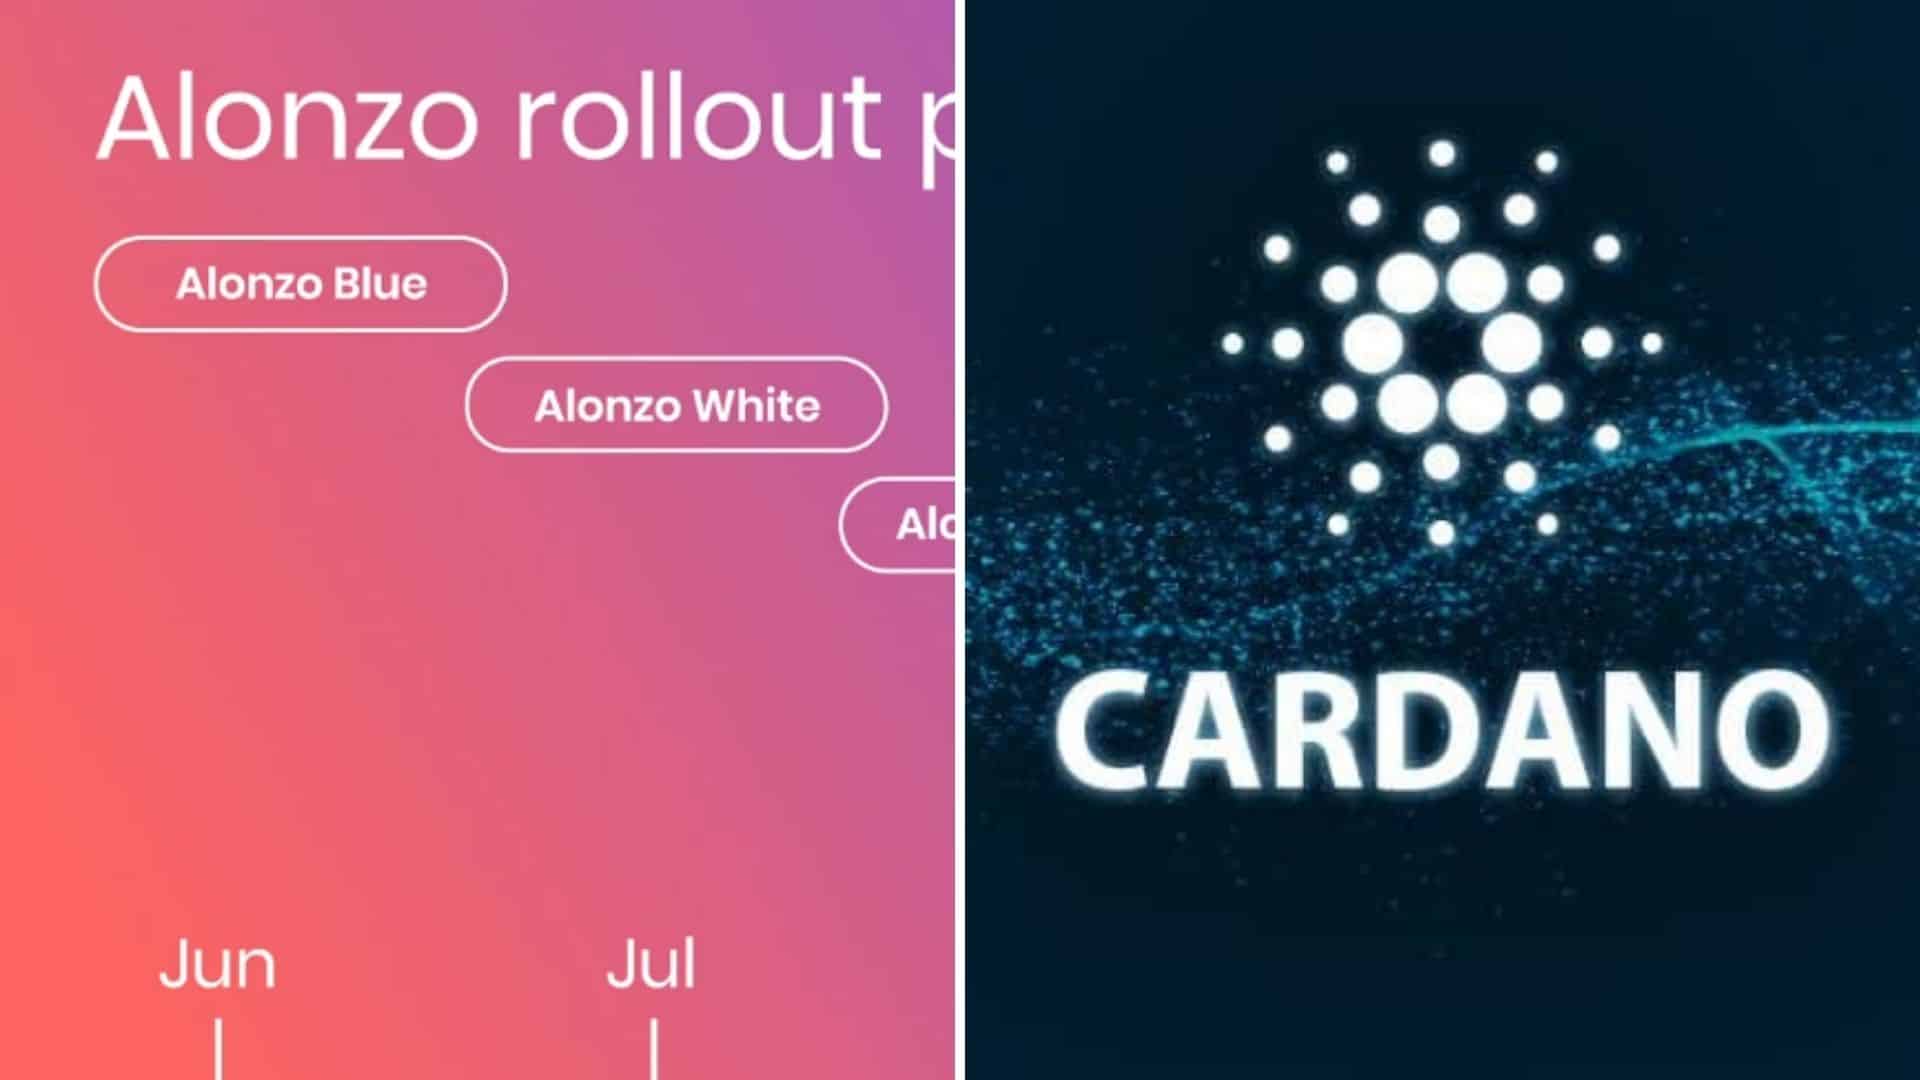 Cardano Set For Alonzo Launch, Smart Contracts And NFTs To Come